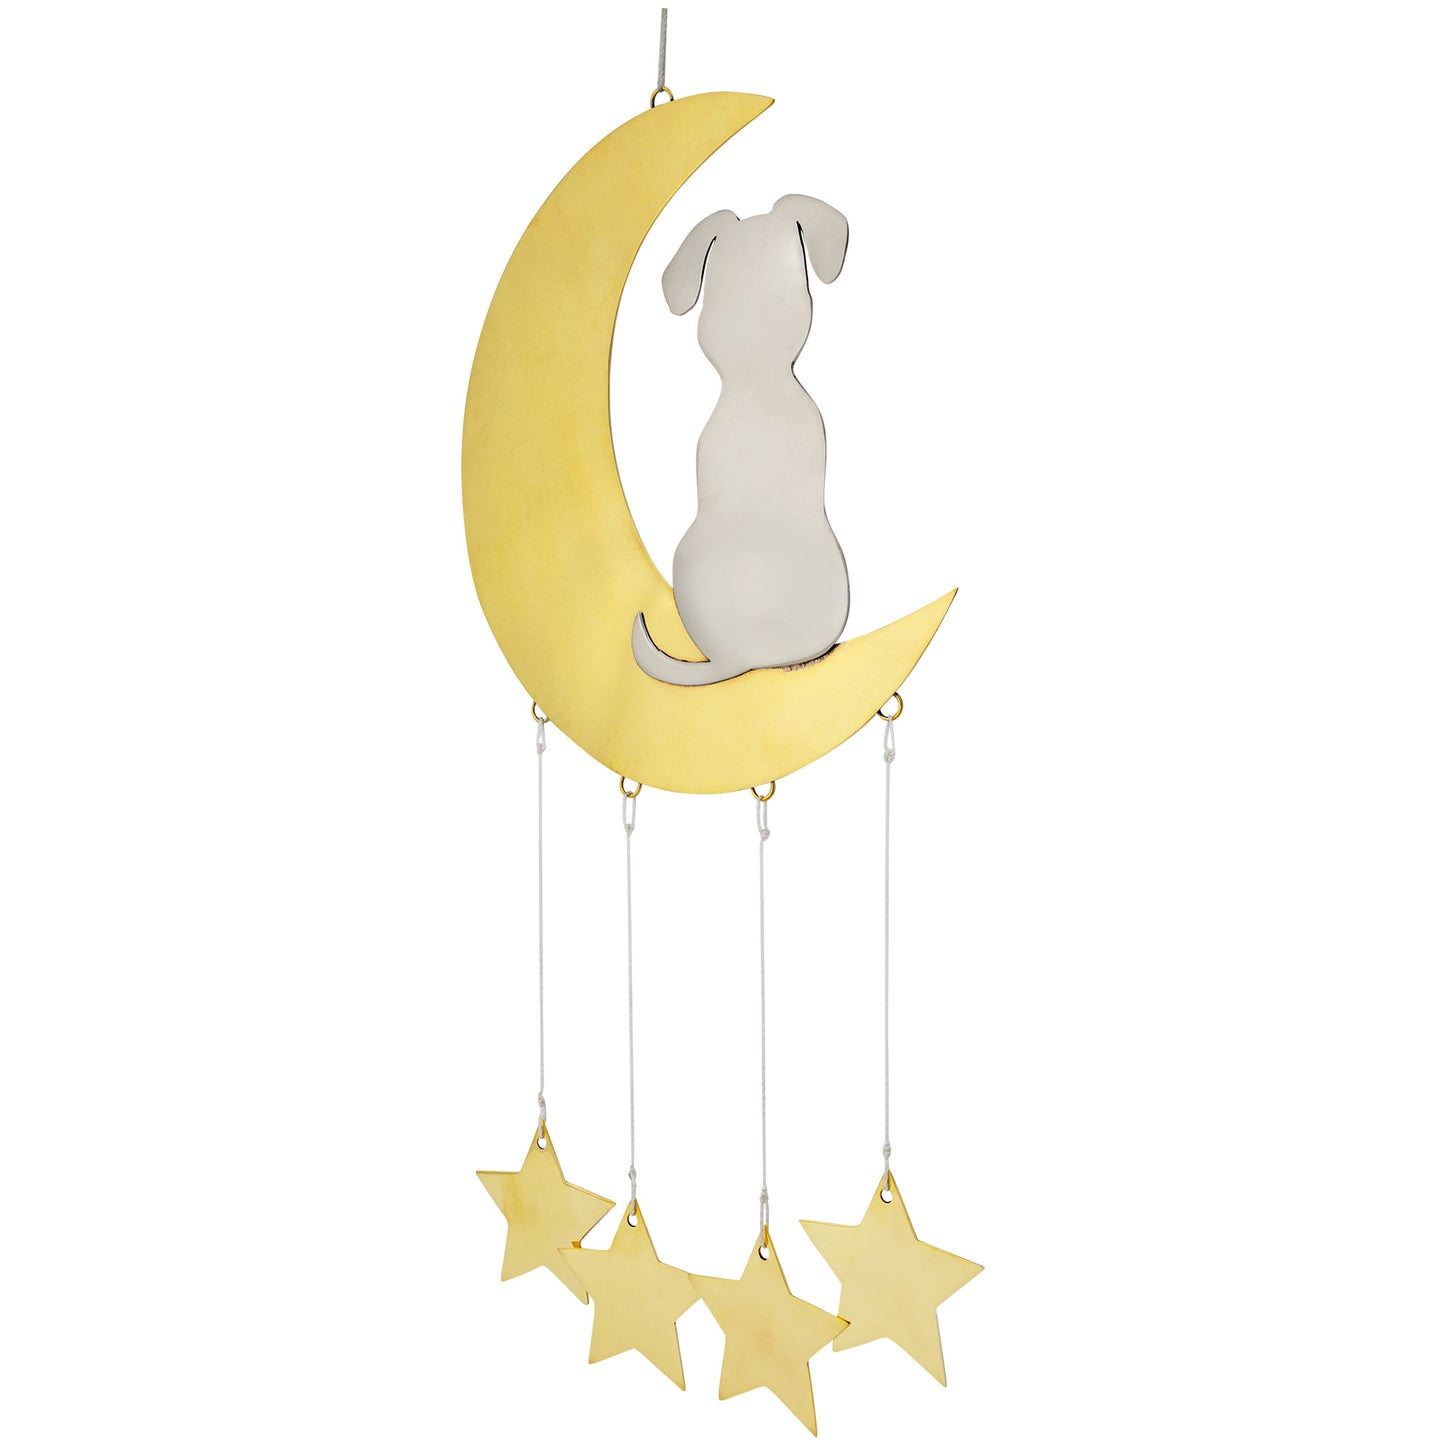 Moonlight Dog Mixed Metal Wind Chime